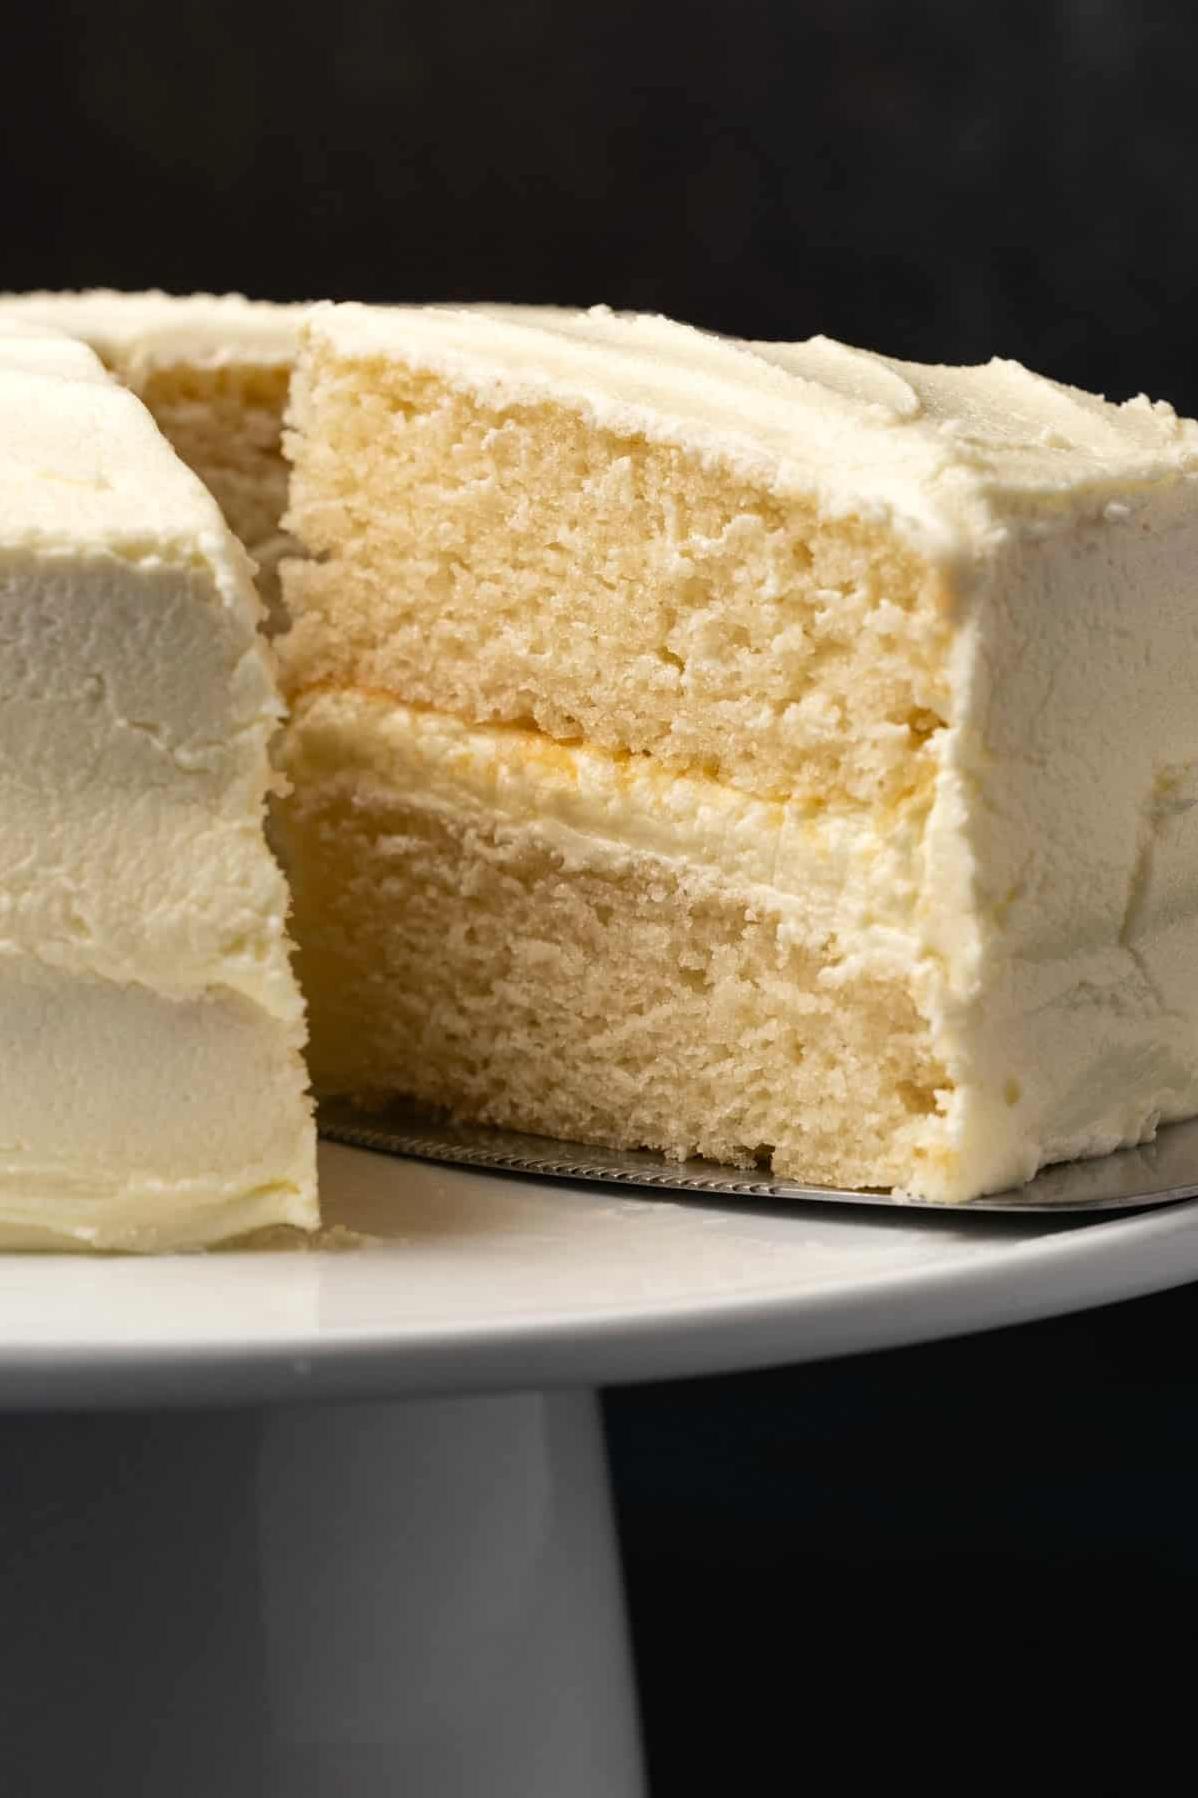 Delight in Every Bite with this Vegan White Cake Recipe